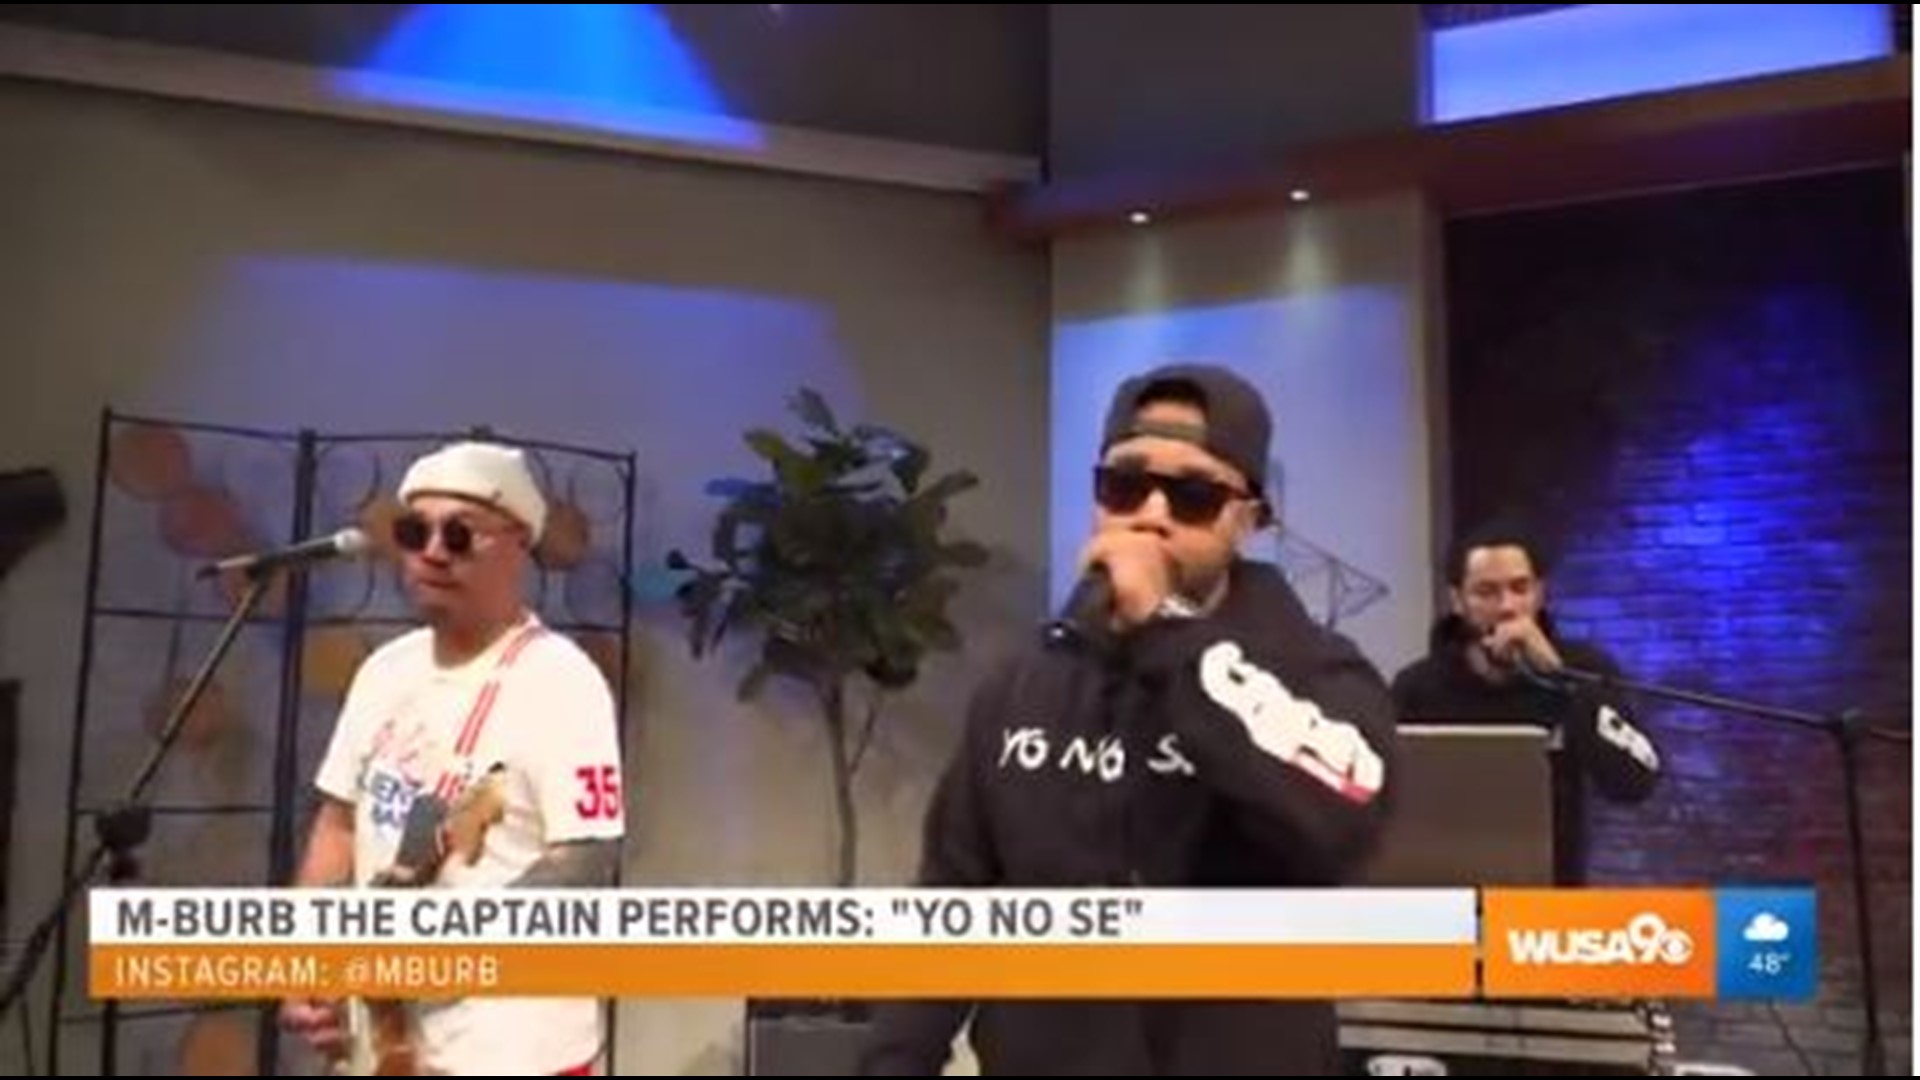 M-Burb performs their hit song, "Yo No Se" for this week's DMV Soundcheck performance! This segment was sponsored by the DC OCTFME.